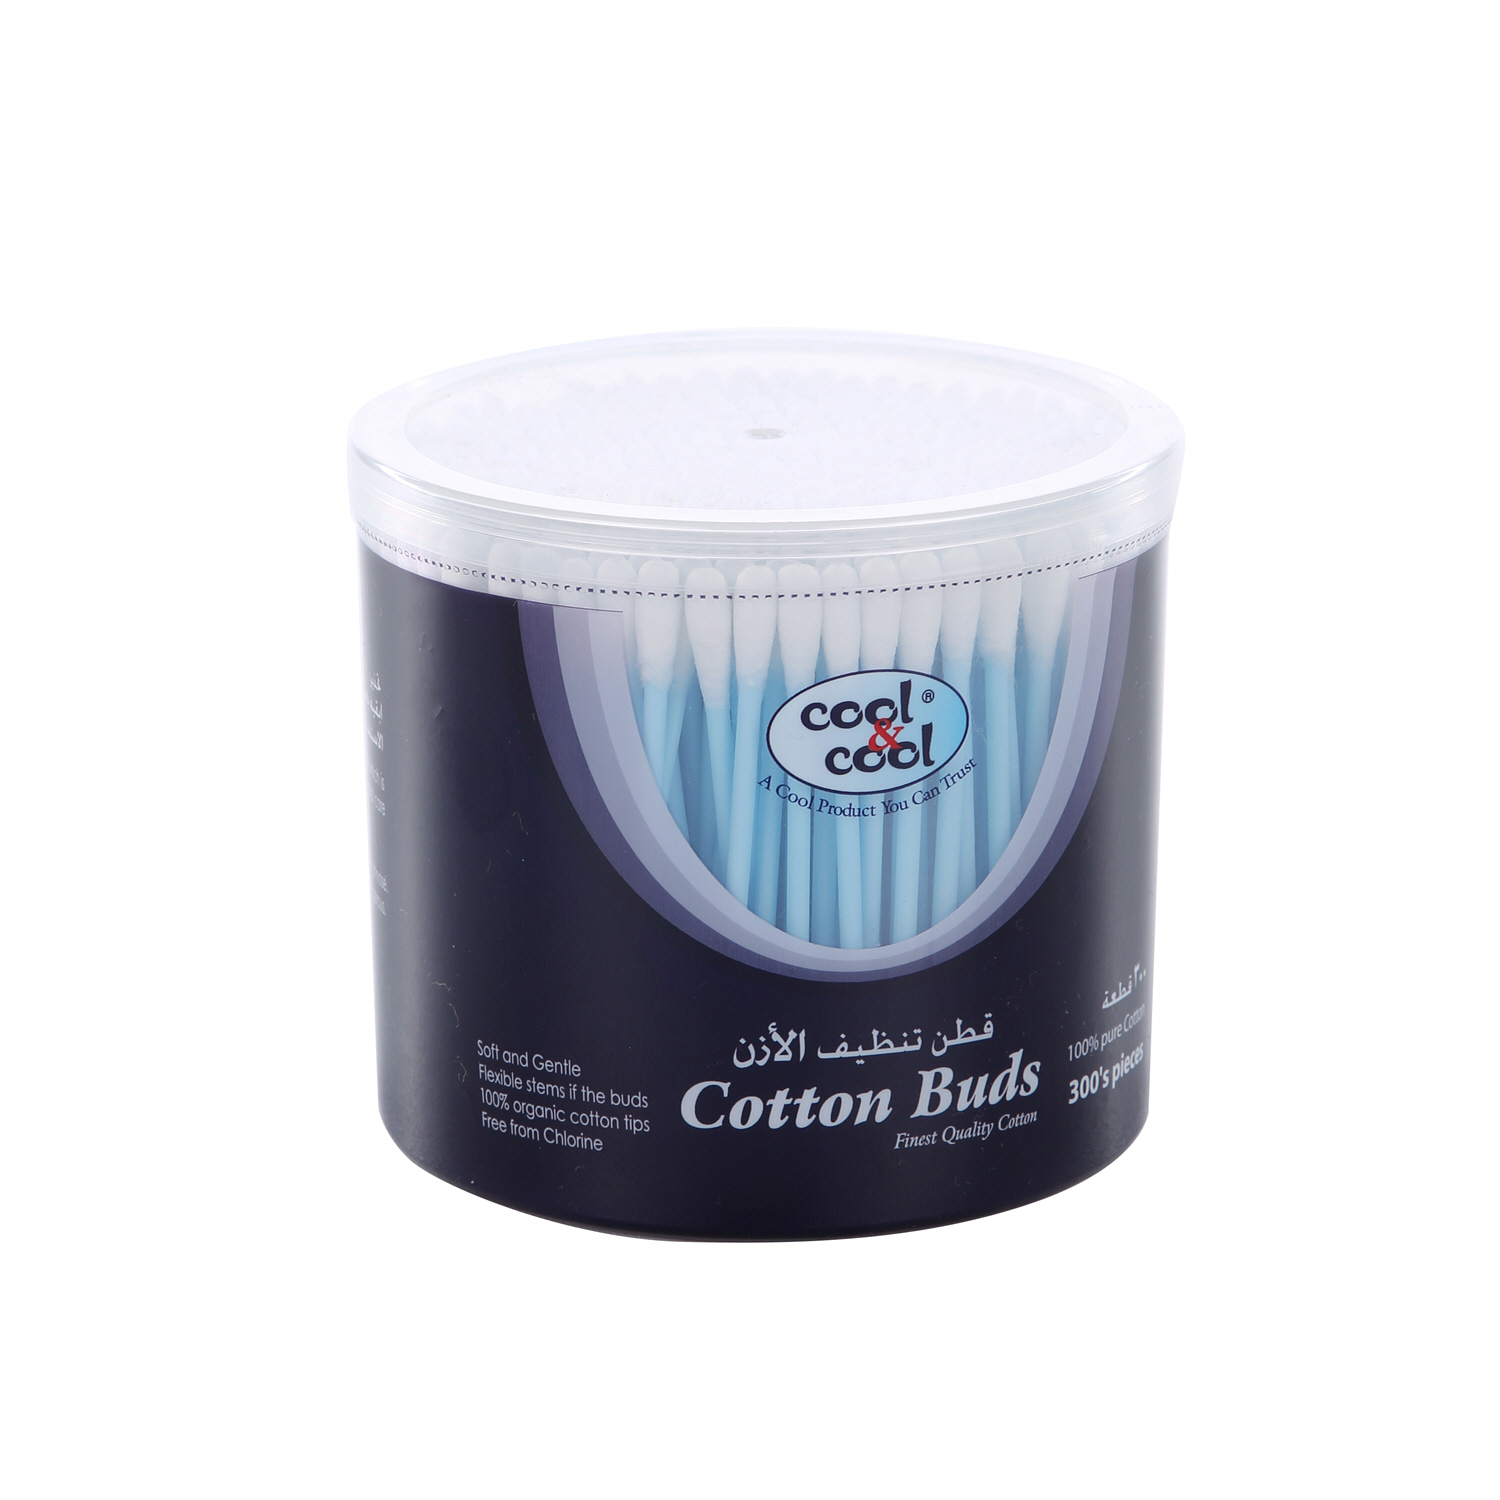 Cool & Cool Cotton Buds 300Buds